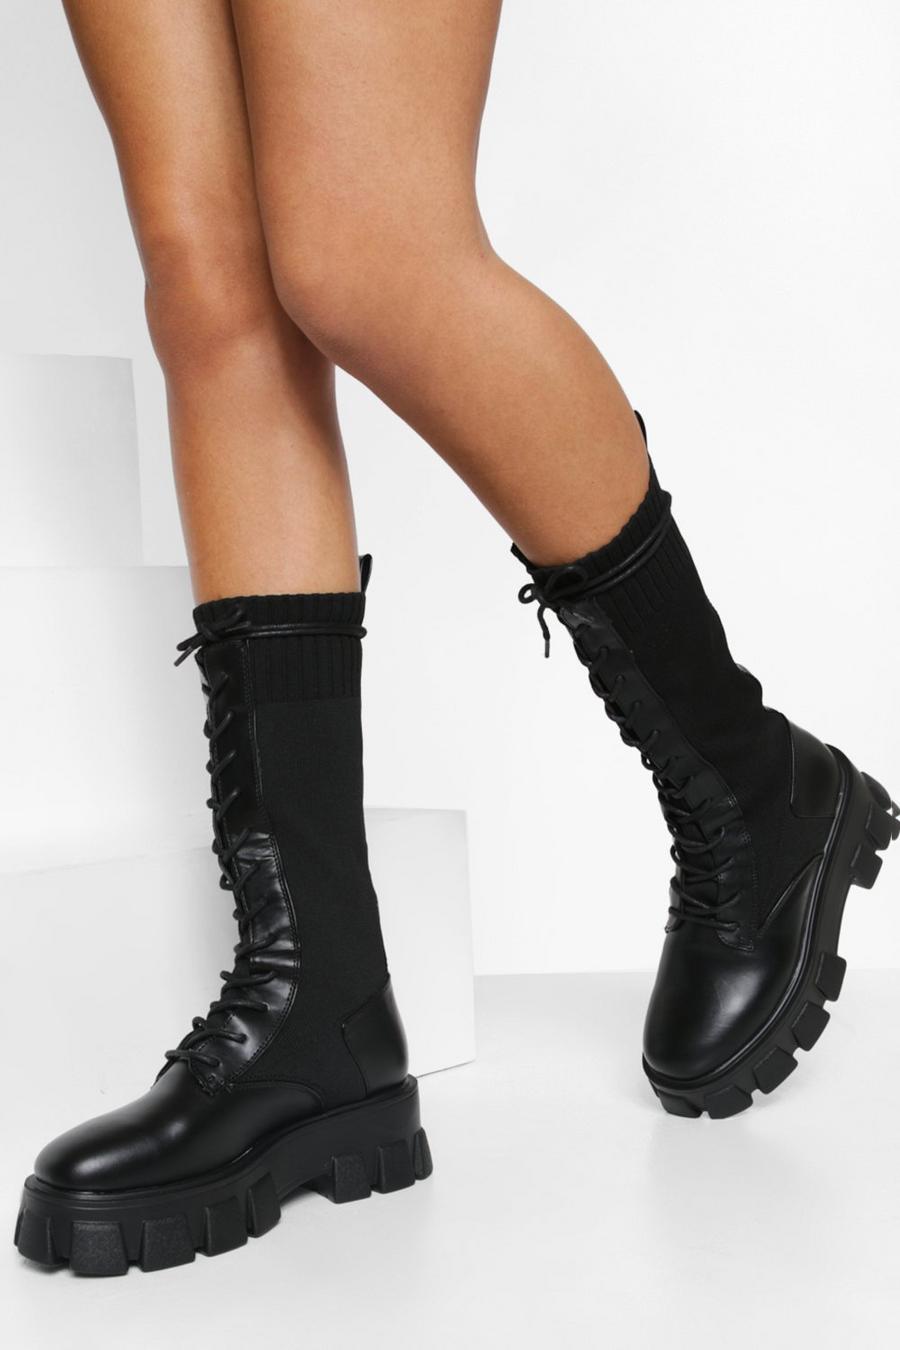 Black noir Chunky Lace Up Calf High Boots